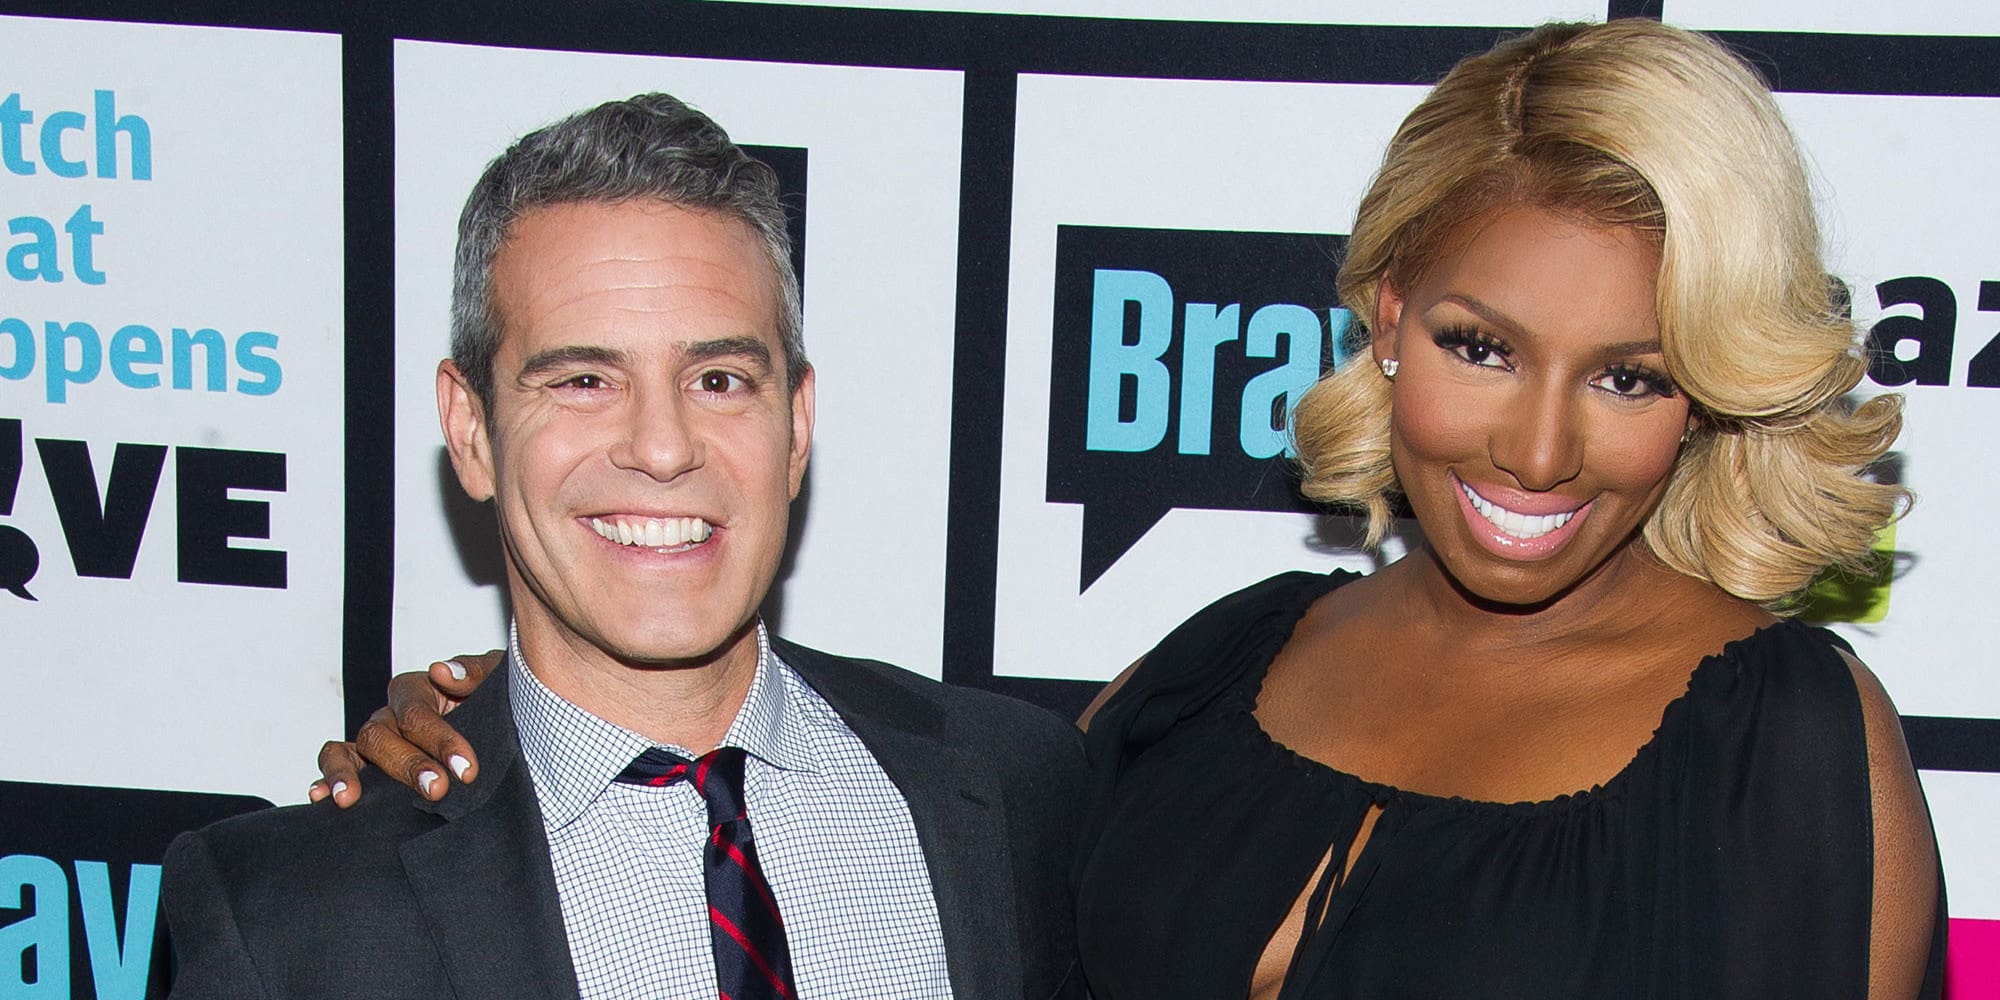 NeNe Leakes Shares More Crazy Videos From Andy Cohen's Baby Shower - Check Out The Ladies Dancing On The Table!